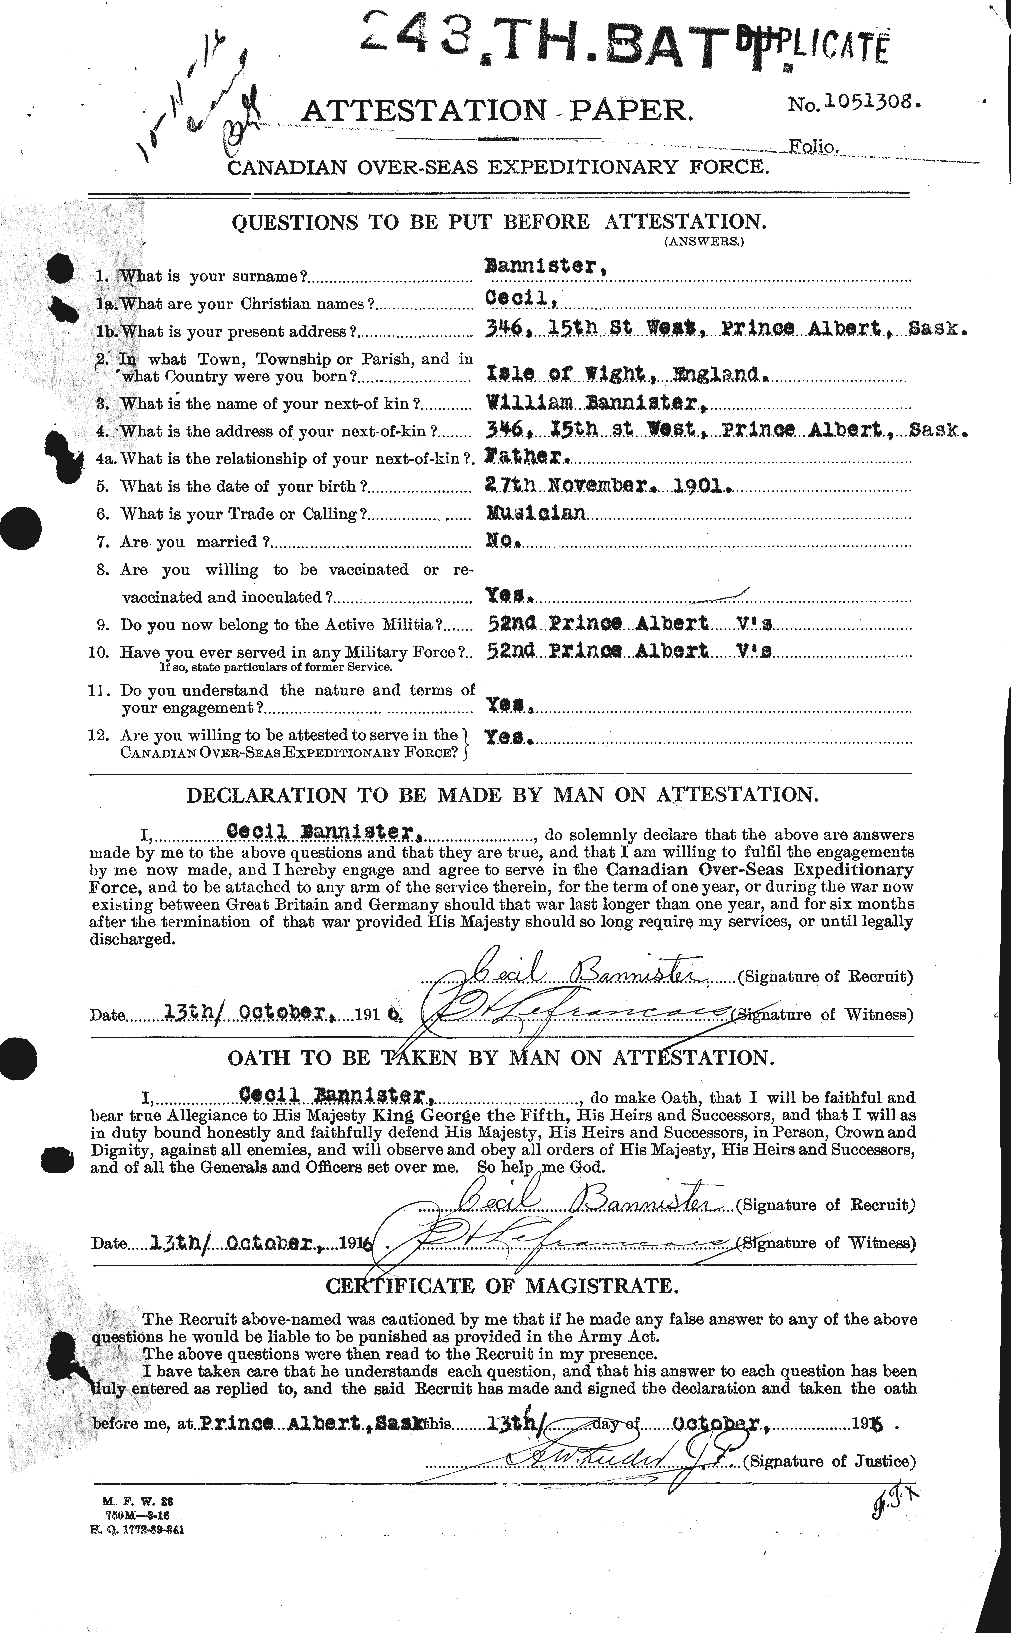 Personnel Records of the First World War - CEF 224811a